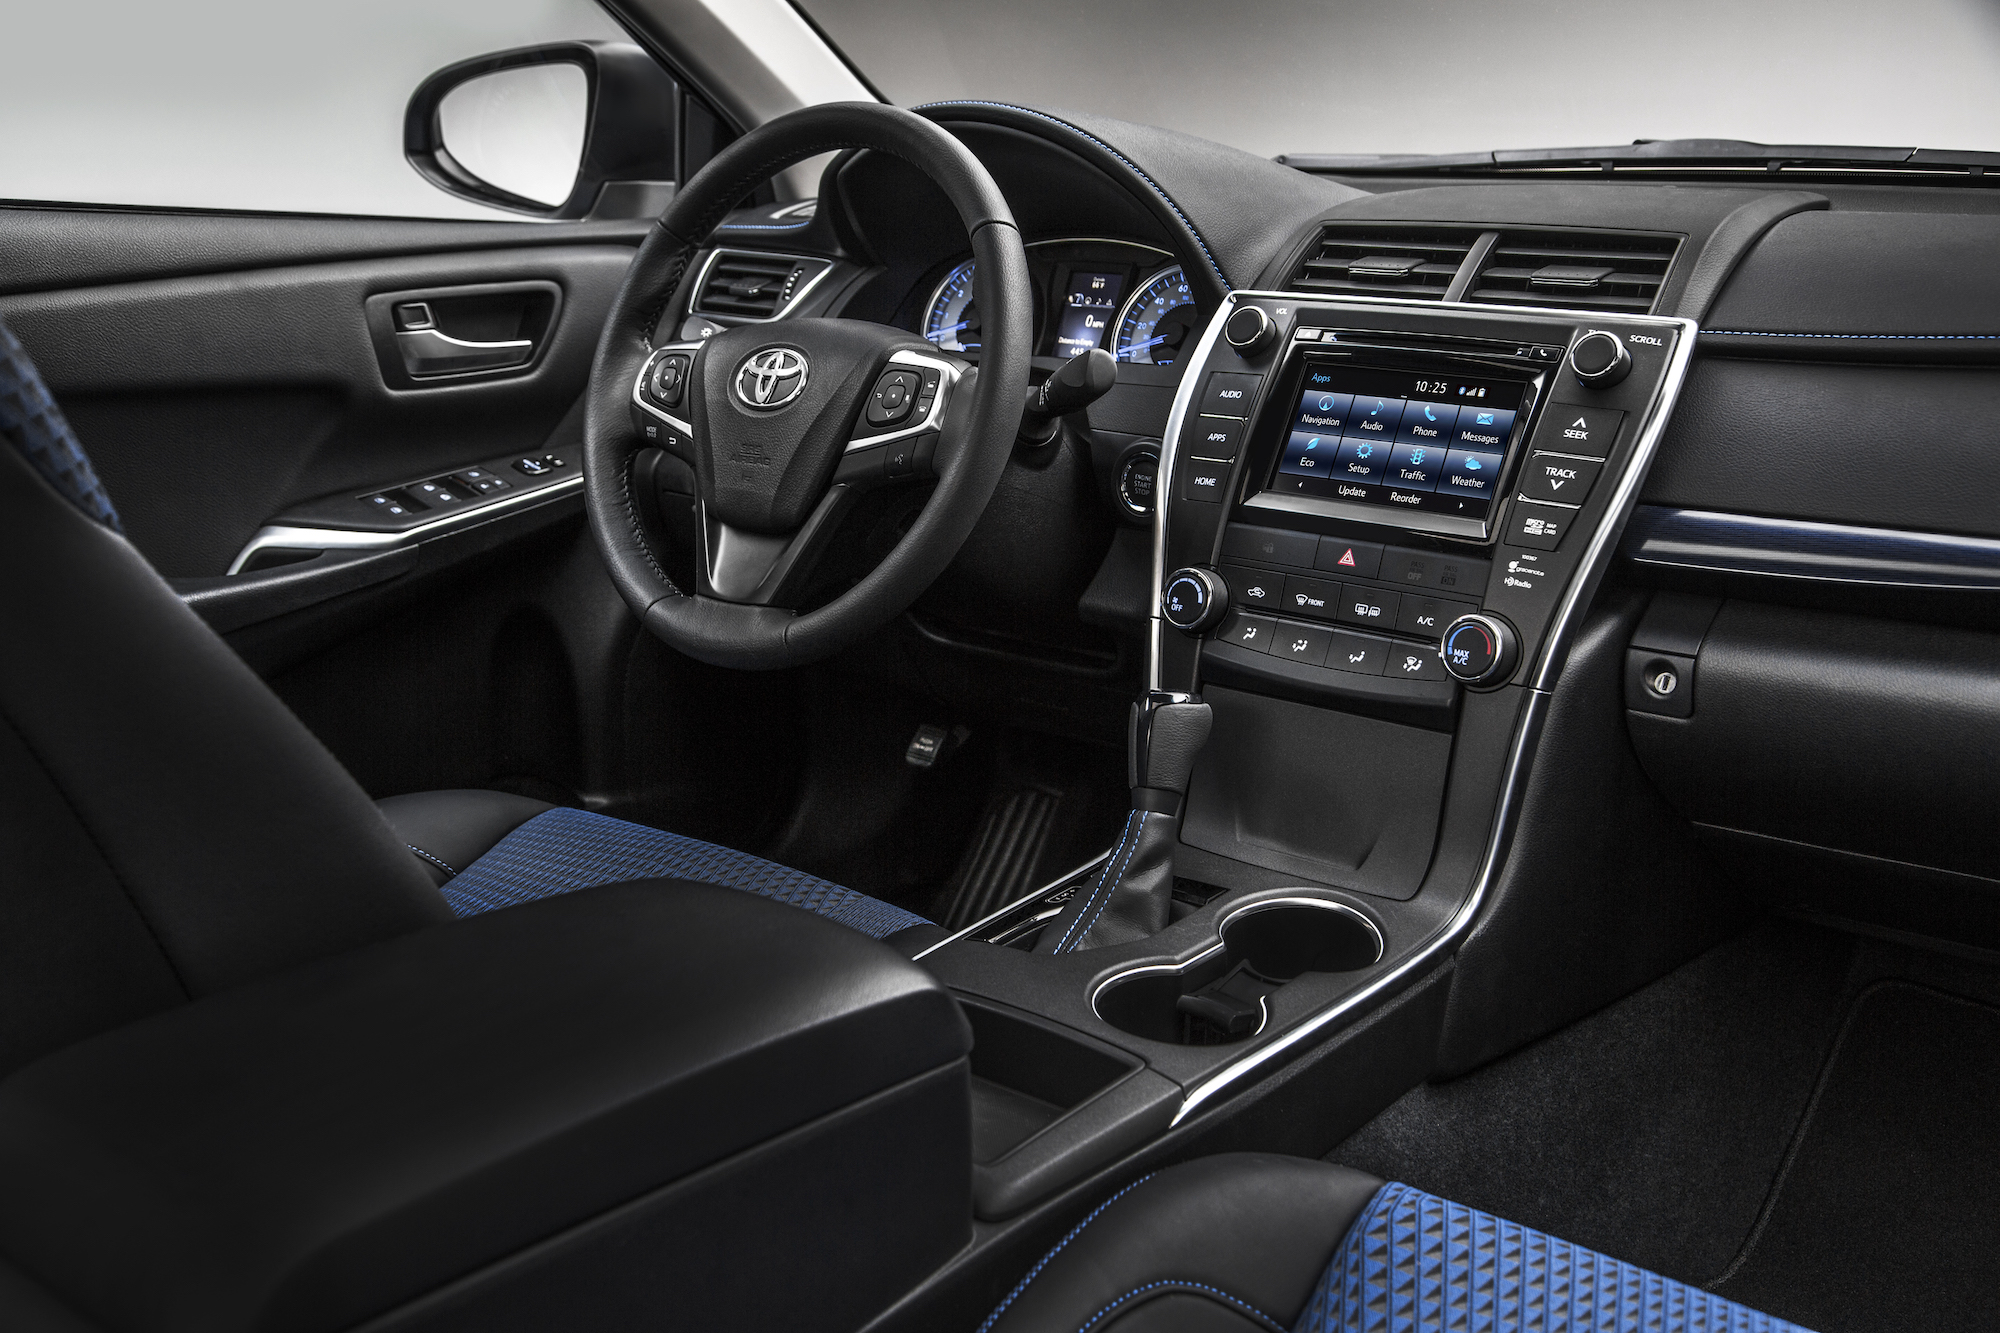 The black and blue interior of a 2016 Toyota Camry midsize sedan